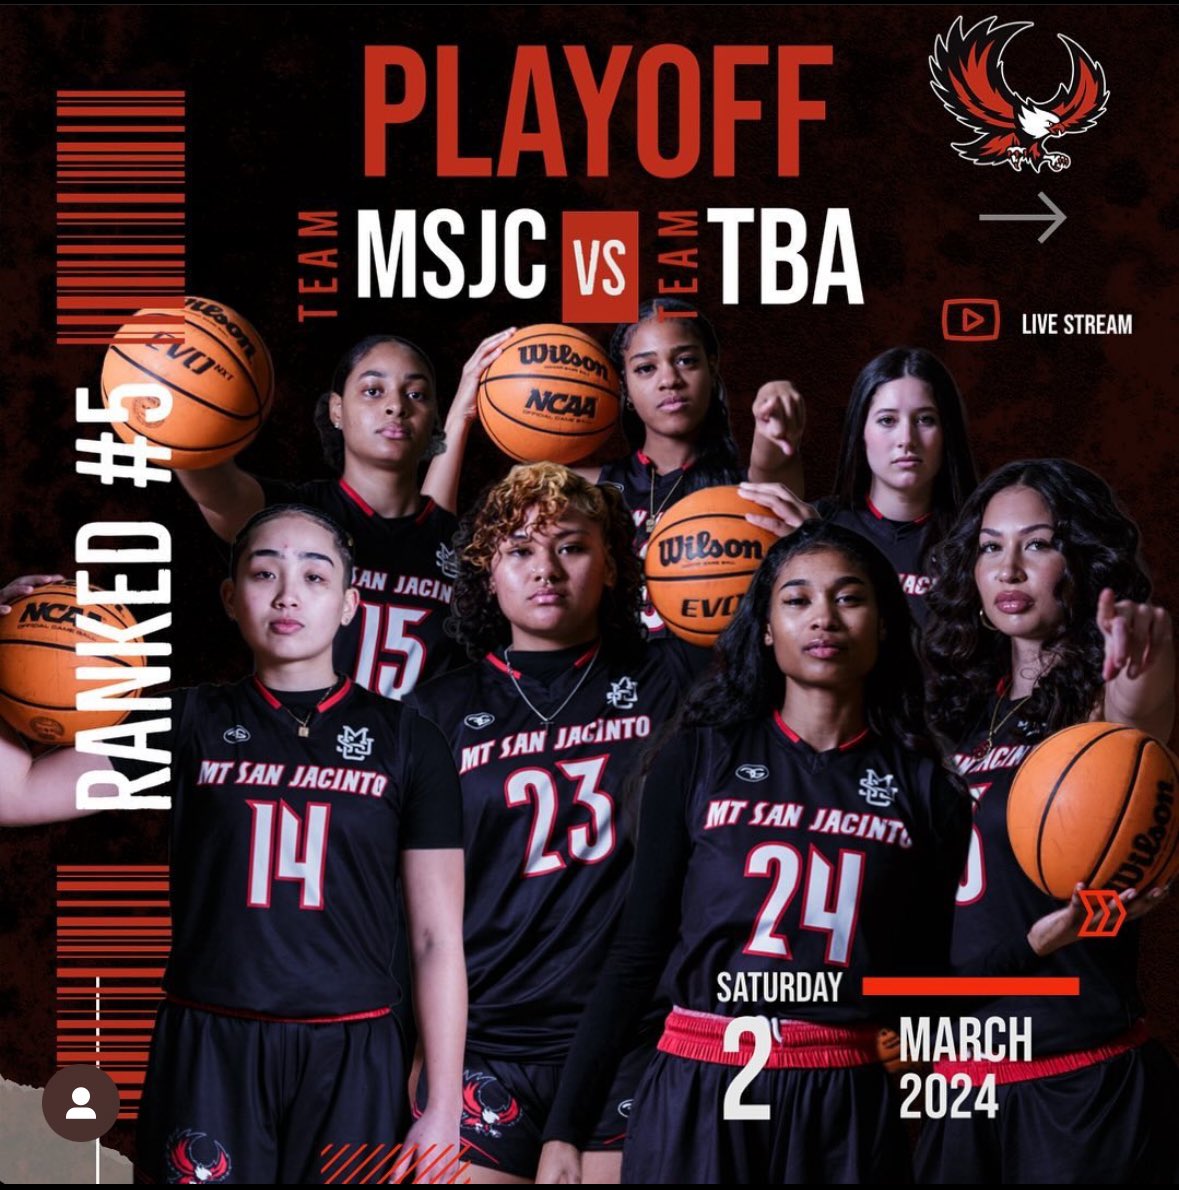 The Lady Eagles are ranked #5 in the south and have received a first round bye for playoffs. Mt. San Jacinto Women’s Basketball will be hosting the winner of Citrus and RCC this Saturday March 2nd at 7:00pm. Come out and support your lady eagles. Let’s pack the stands!